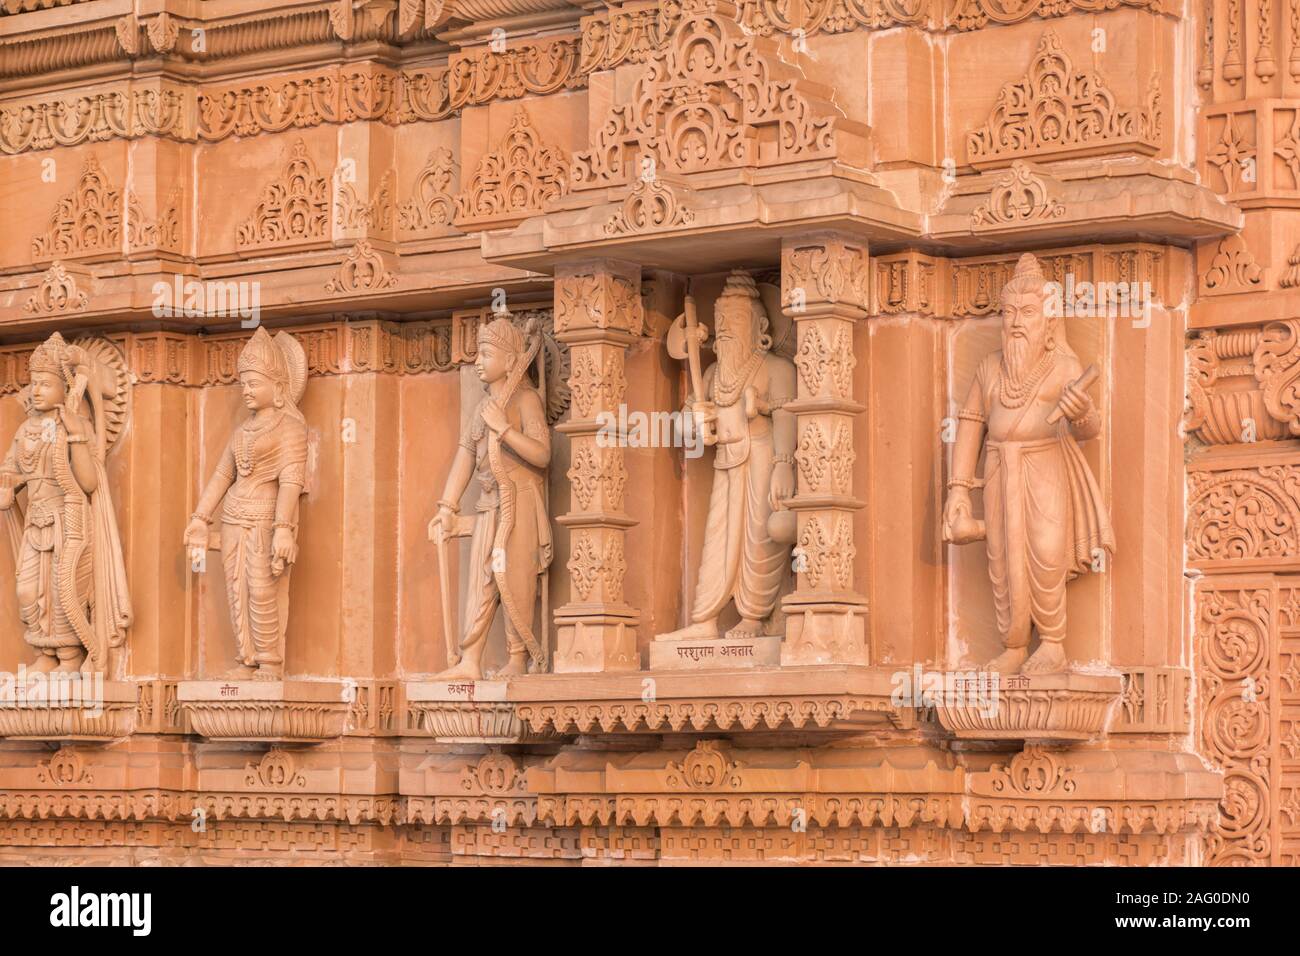 Architectural details of Swaminarayan temple in Diamond Harbour Rd, Kolkata, West Bengal, India Stock Photo